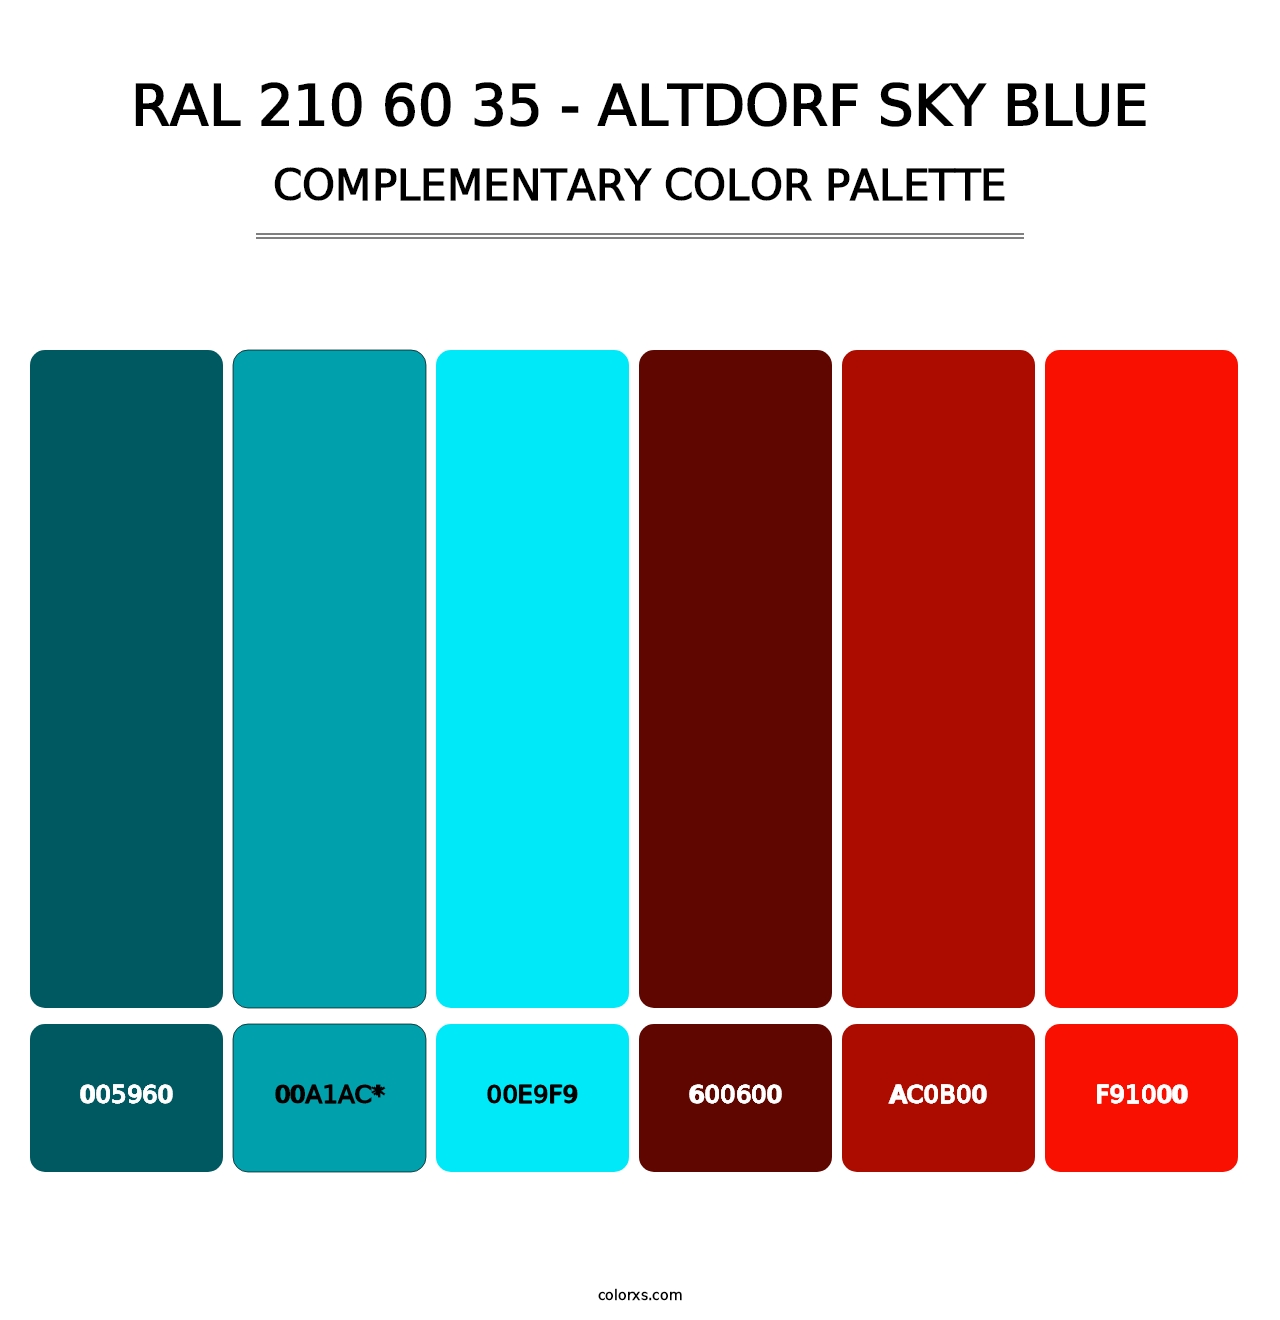 RAL 210 60 35 - Altdorf Sky Blue - Complementary Color Palette